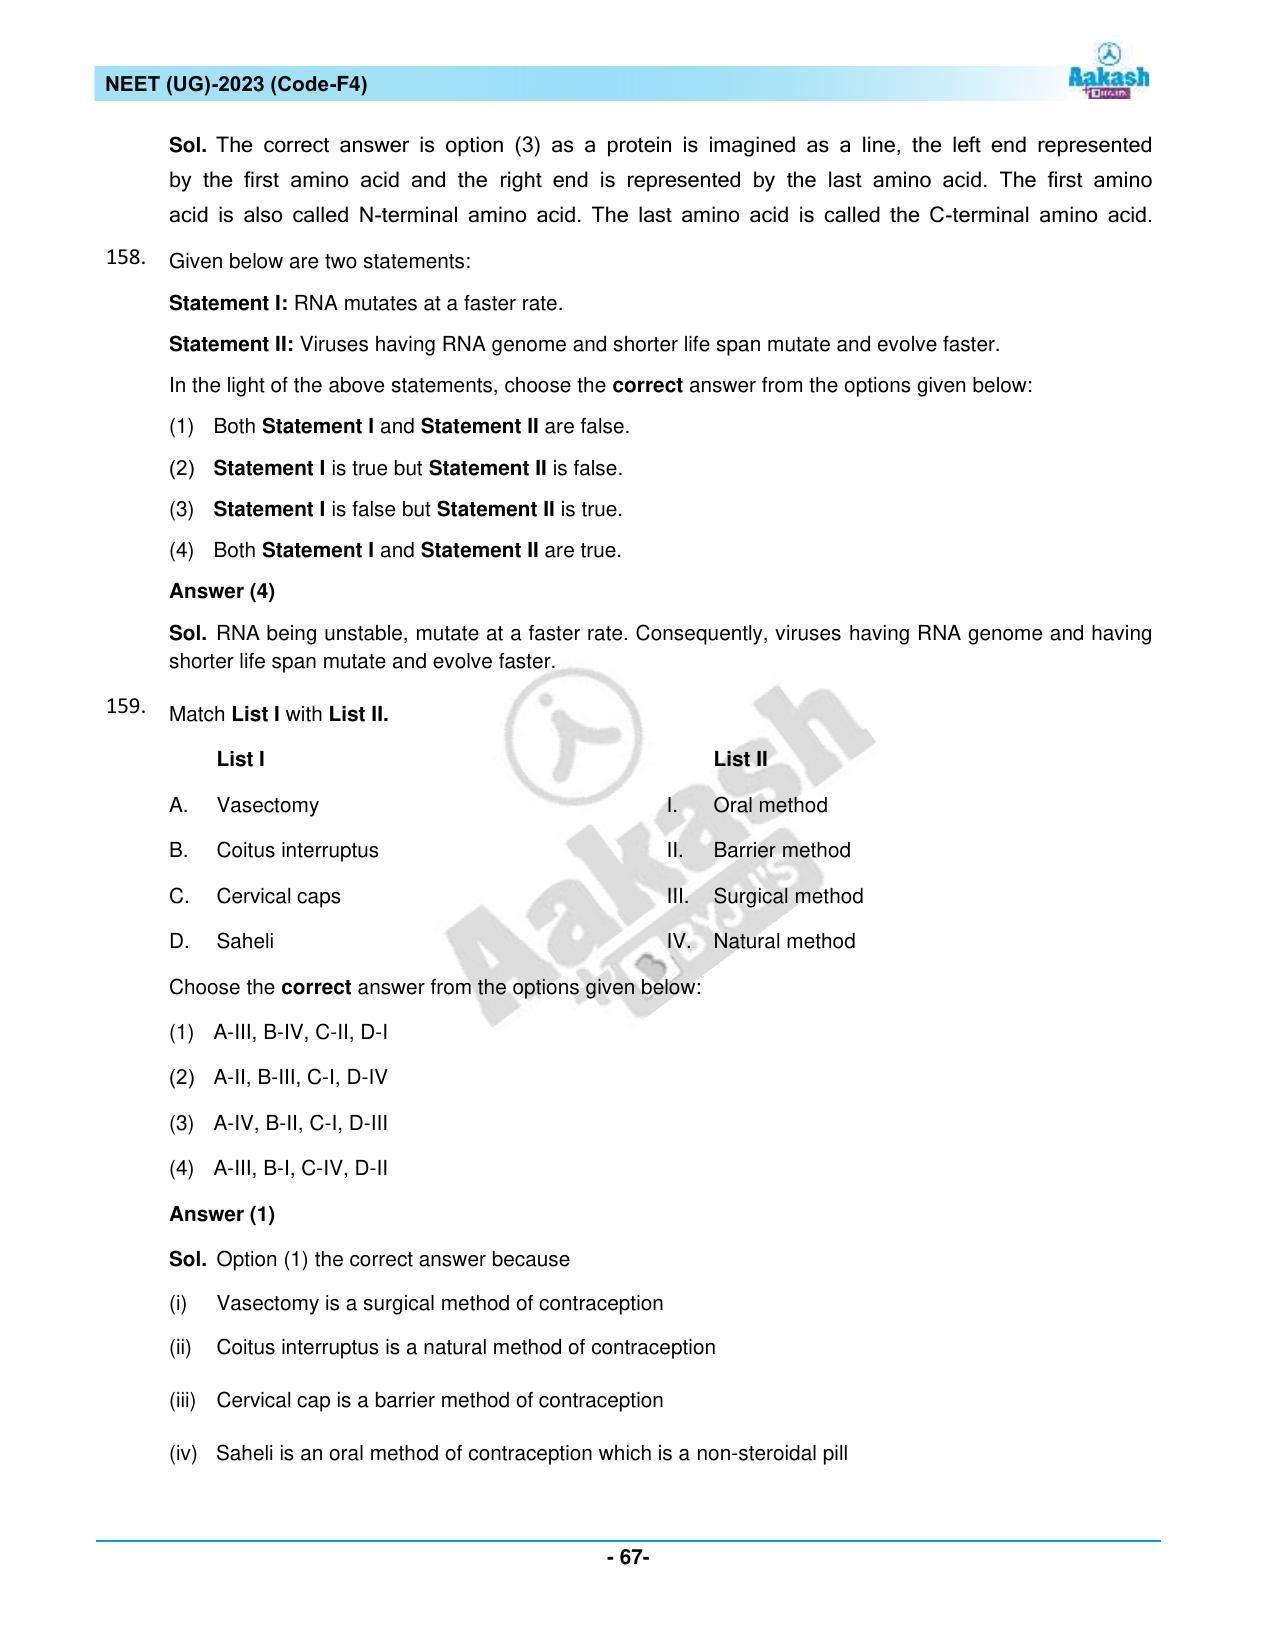 NEET 2023 Question Paper F4 - Page 67